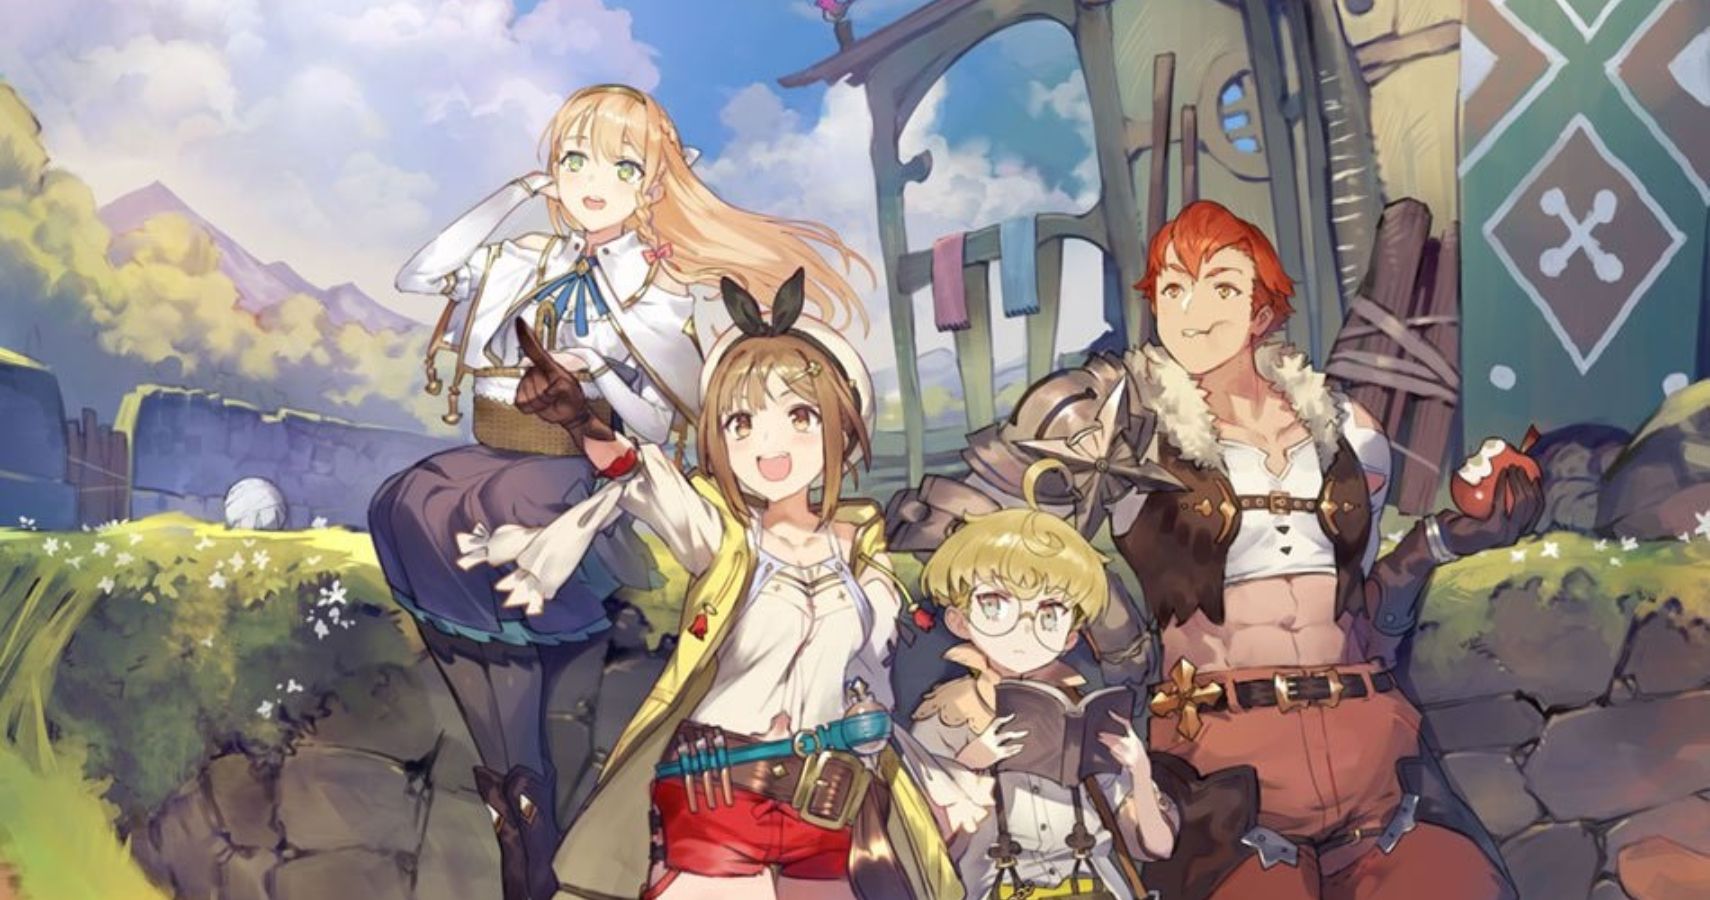 Atelier Ryza Celebrates 1 Million Shipments With Cute Artwork and New Costumes